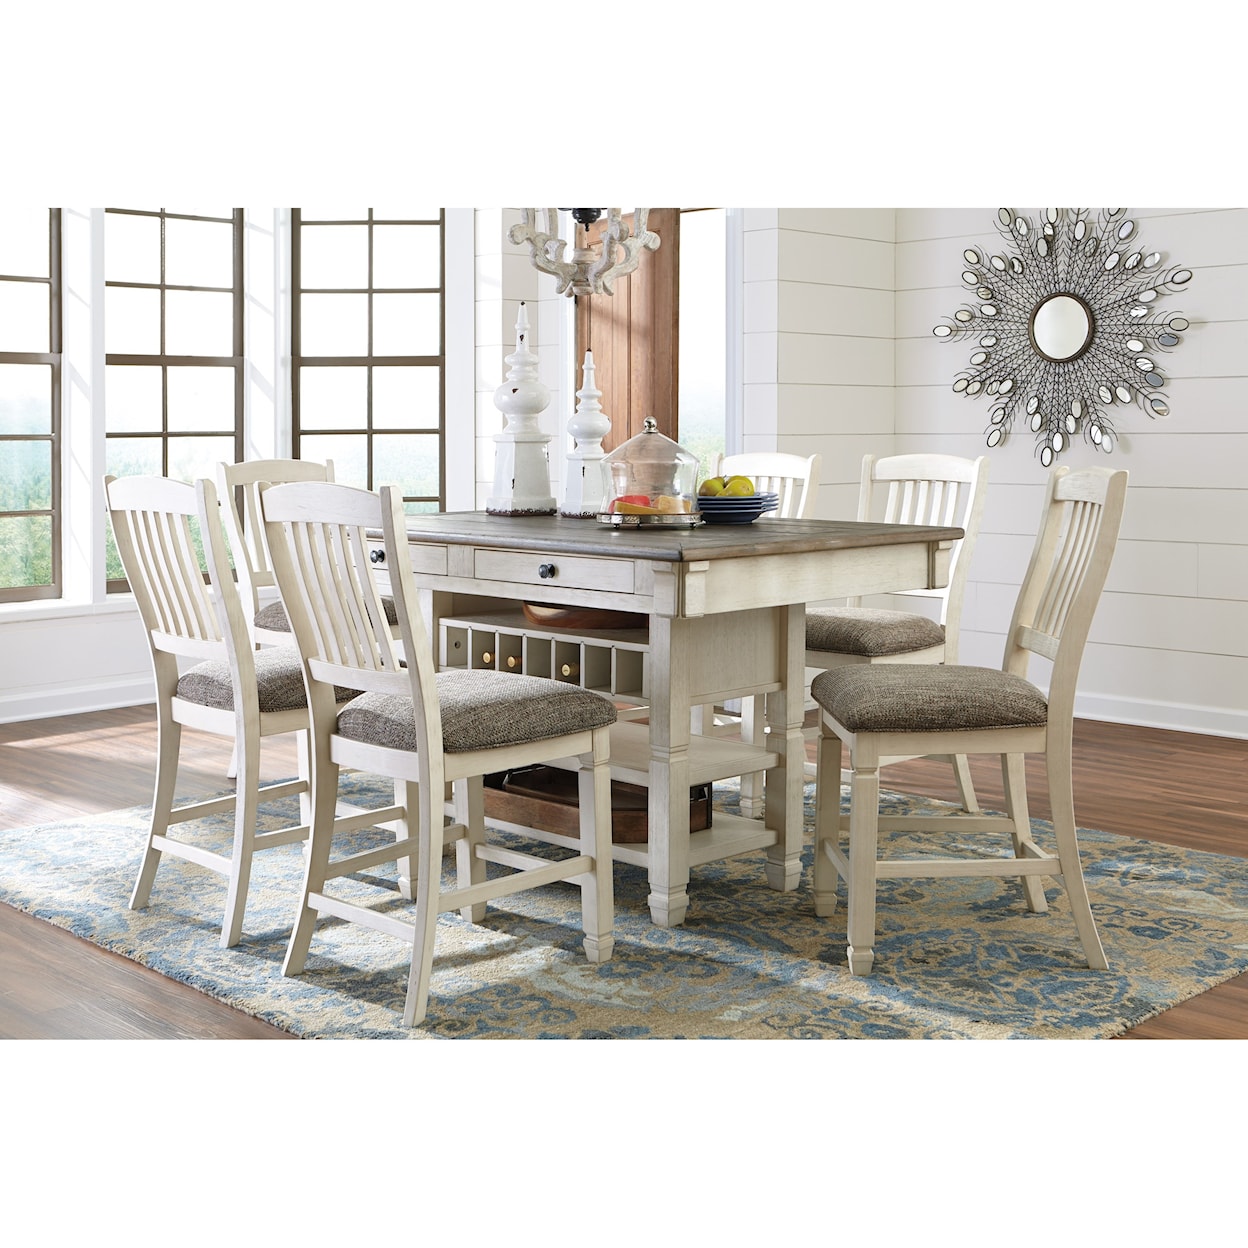 Signature Design by Ashley Furniture Bolanburg Rectangular Dining Room Counter Table